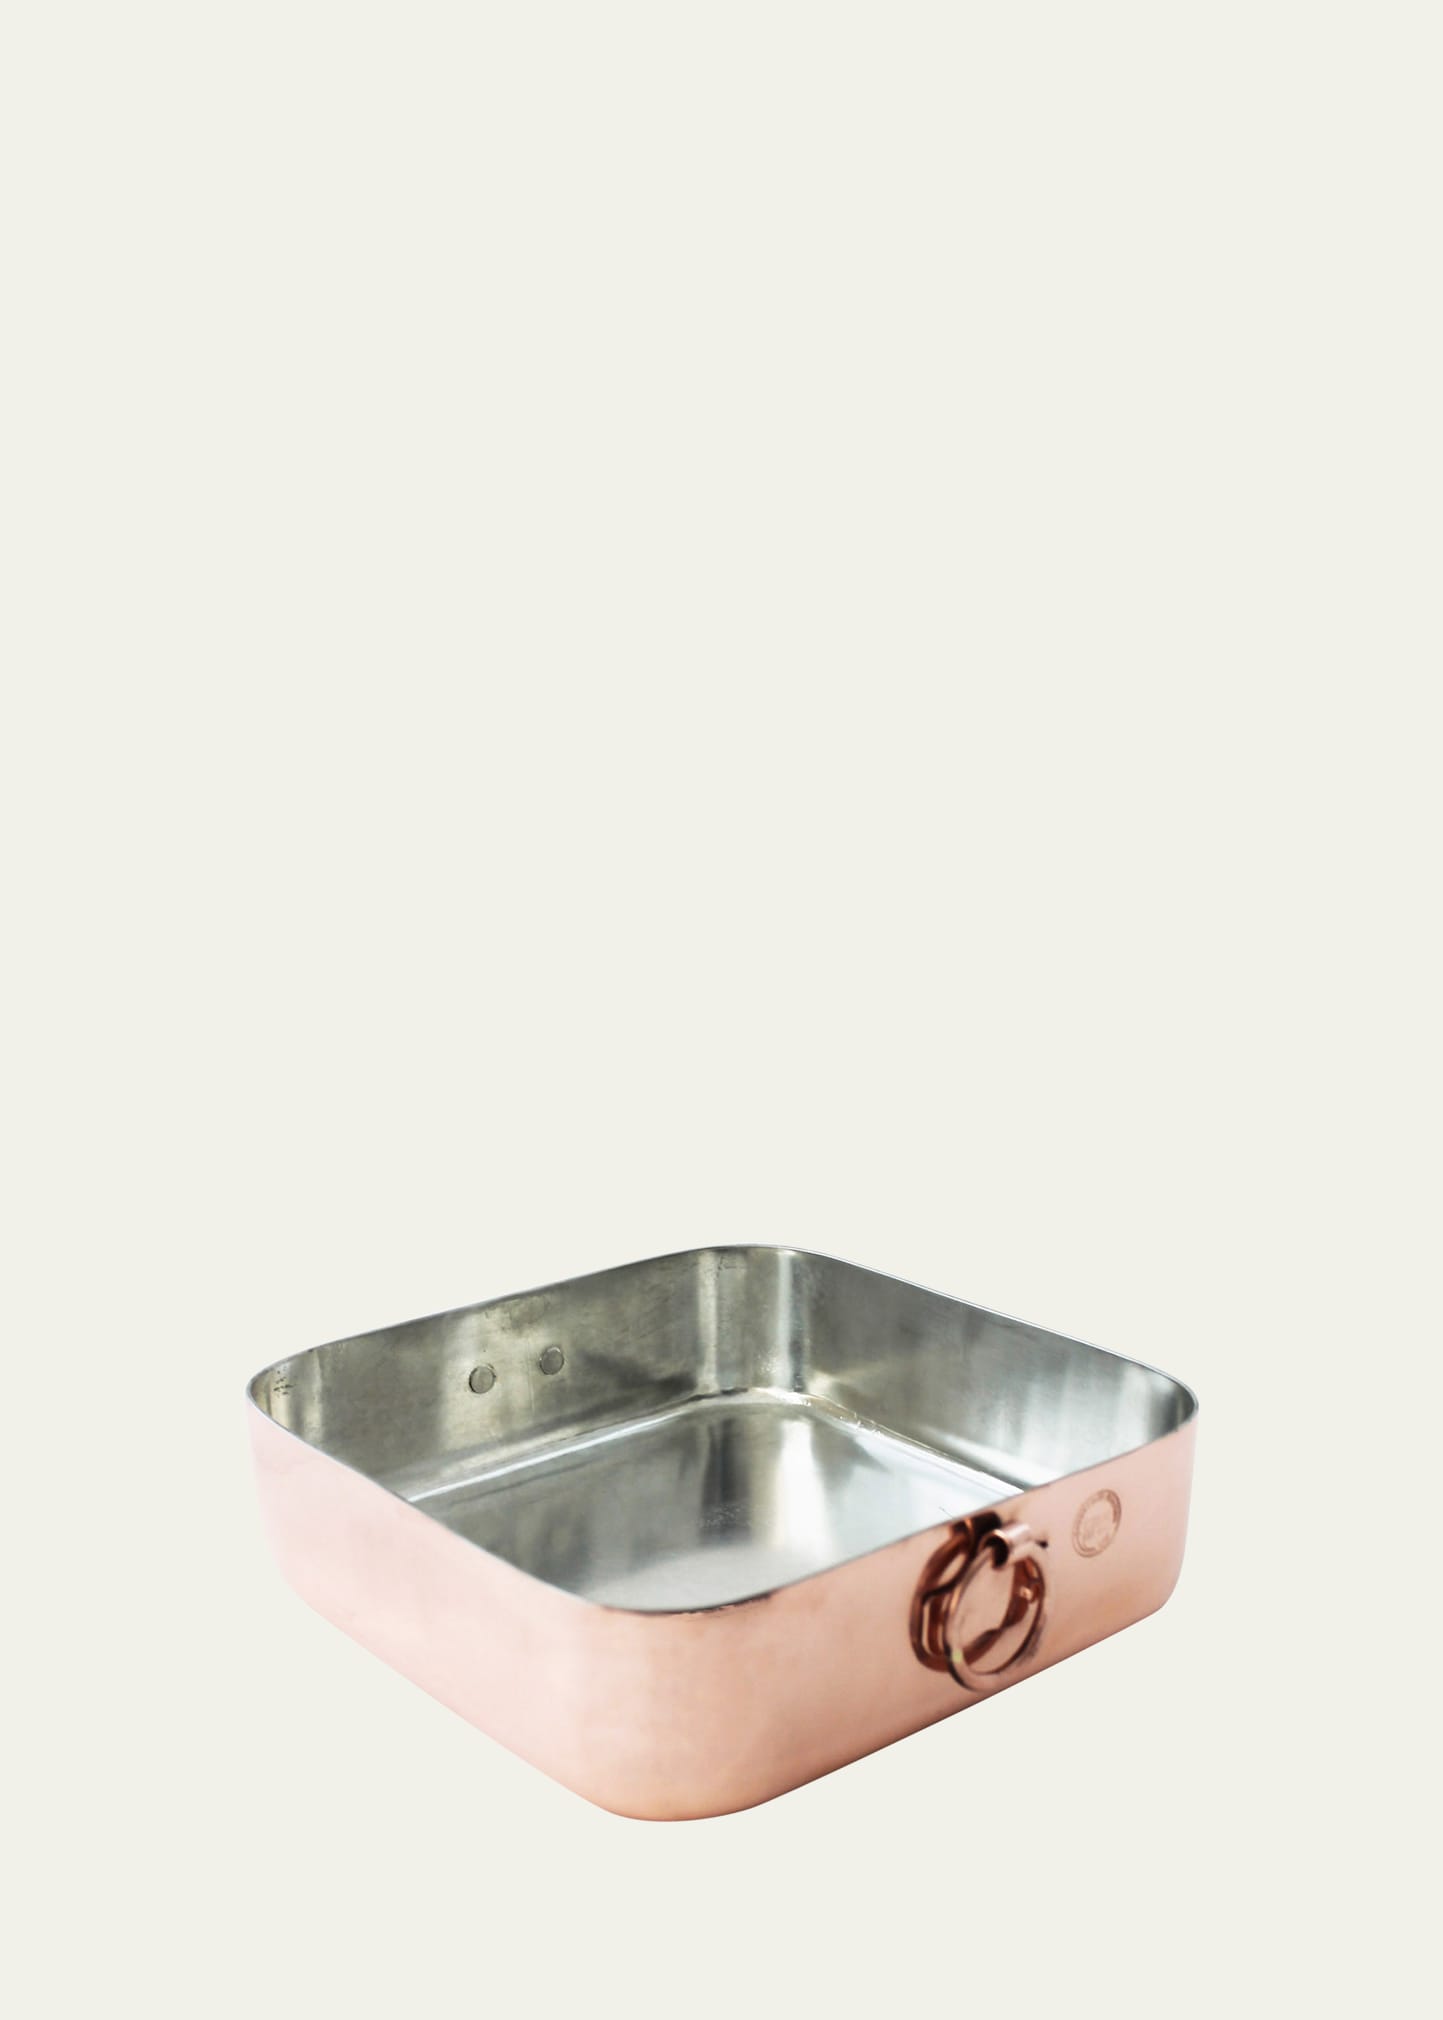 Coppermill Kitchen Vintage Inspired Copper Baking Pan In Pink